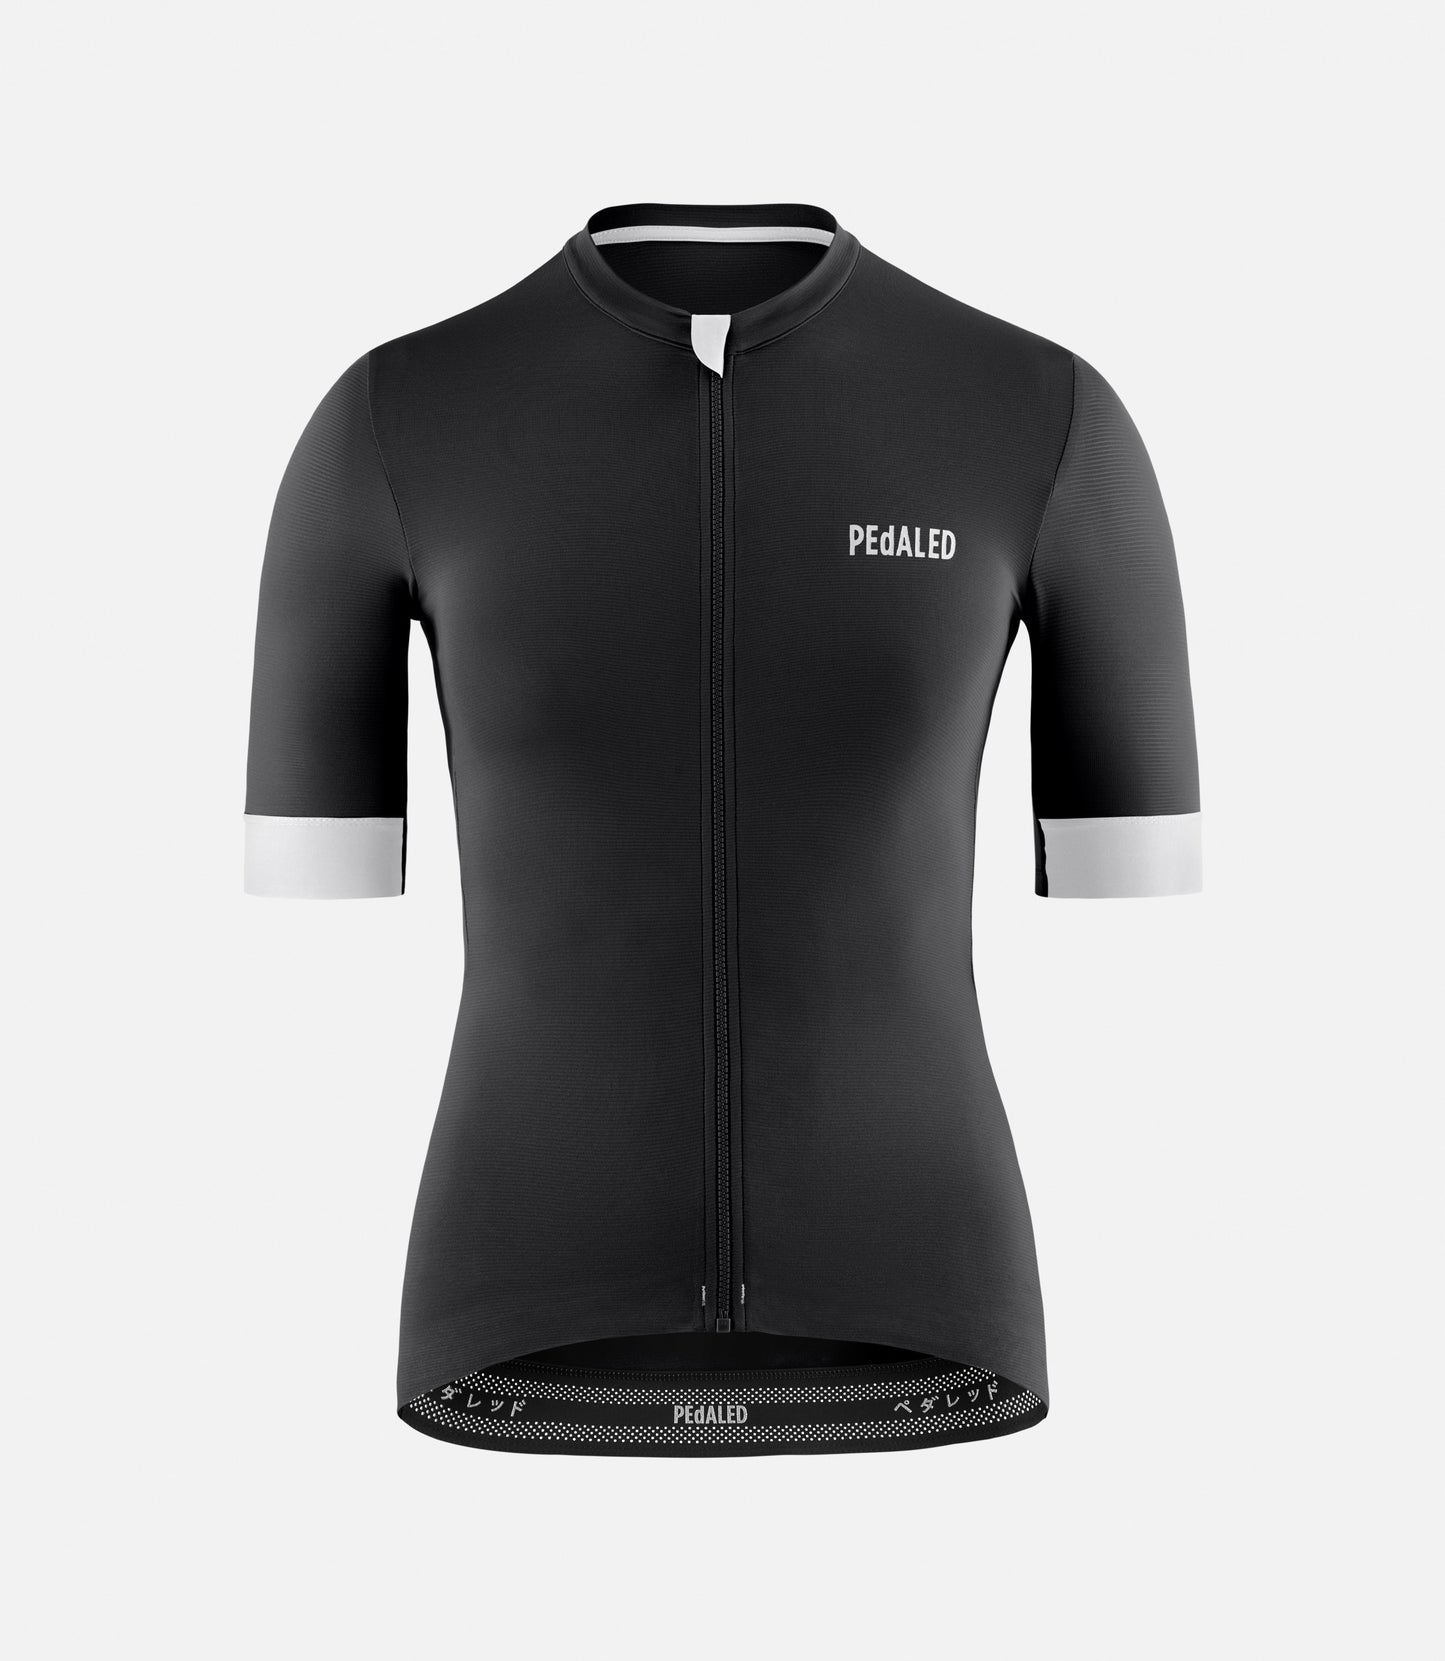 W3SJSES00PE_1_women cycling jersey black essential front pedaled